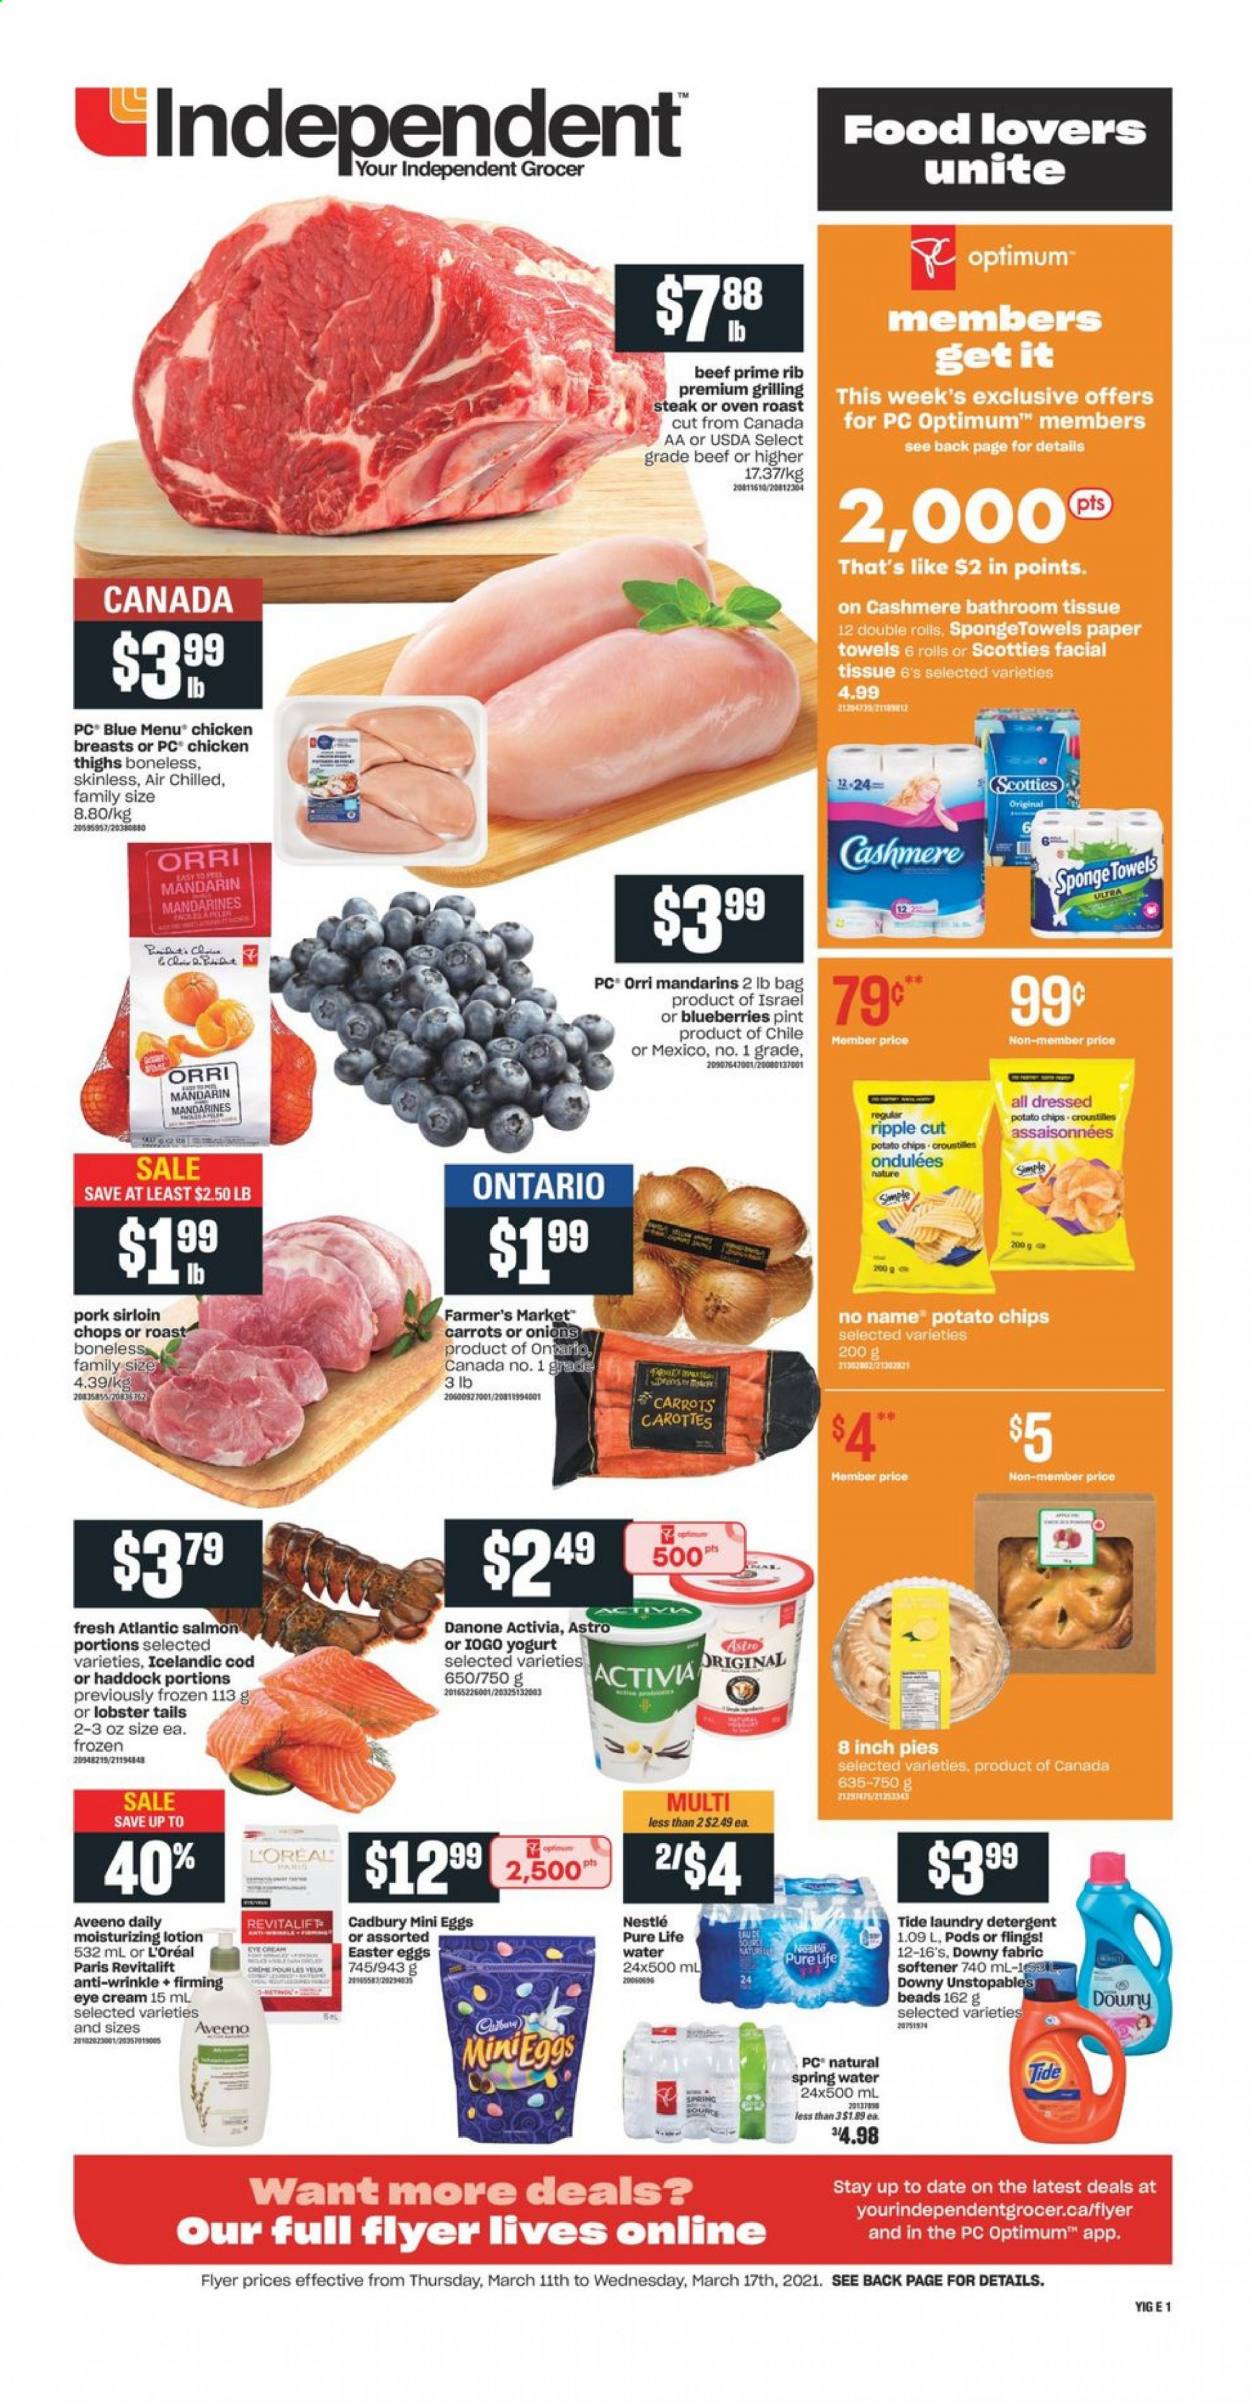 thumbnail - Independent Flyer - March 11, 2021 - March 17, 2021 - Sales products - carrots, onion, blueberries, mandarines, cod, lobster, salmon, haddock, lobster tail, No Name, yoghurt, Activia, Cadbury, potato chips, spring water, Pure Life Water, chicken breasts, chicken thighs, chicken, pork loin, Aveeno, bath tissue, kitchen towels, paper towels, Tide, Unstopables, fabric softener, laundry detergent, Downy Laundry, L’Oréal, eye cream, body lotion, sponge, Optimum, Danone, Nestlé, steak. Page 1.